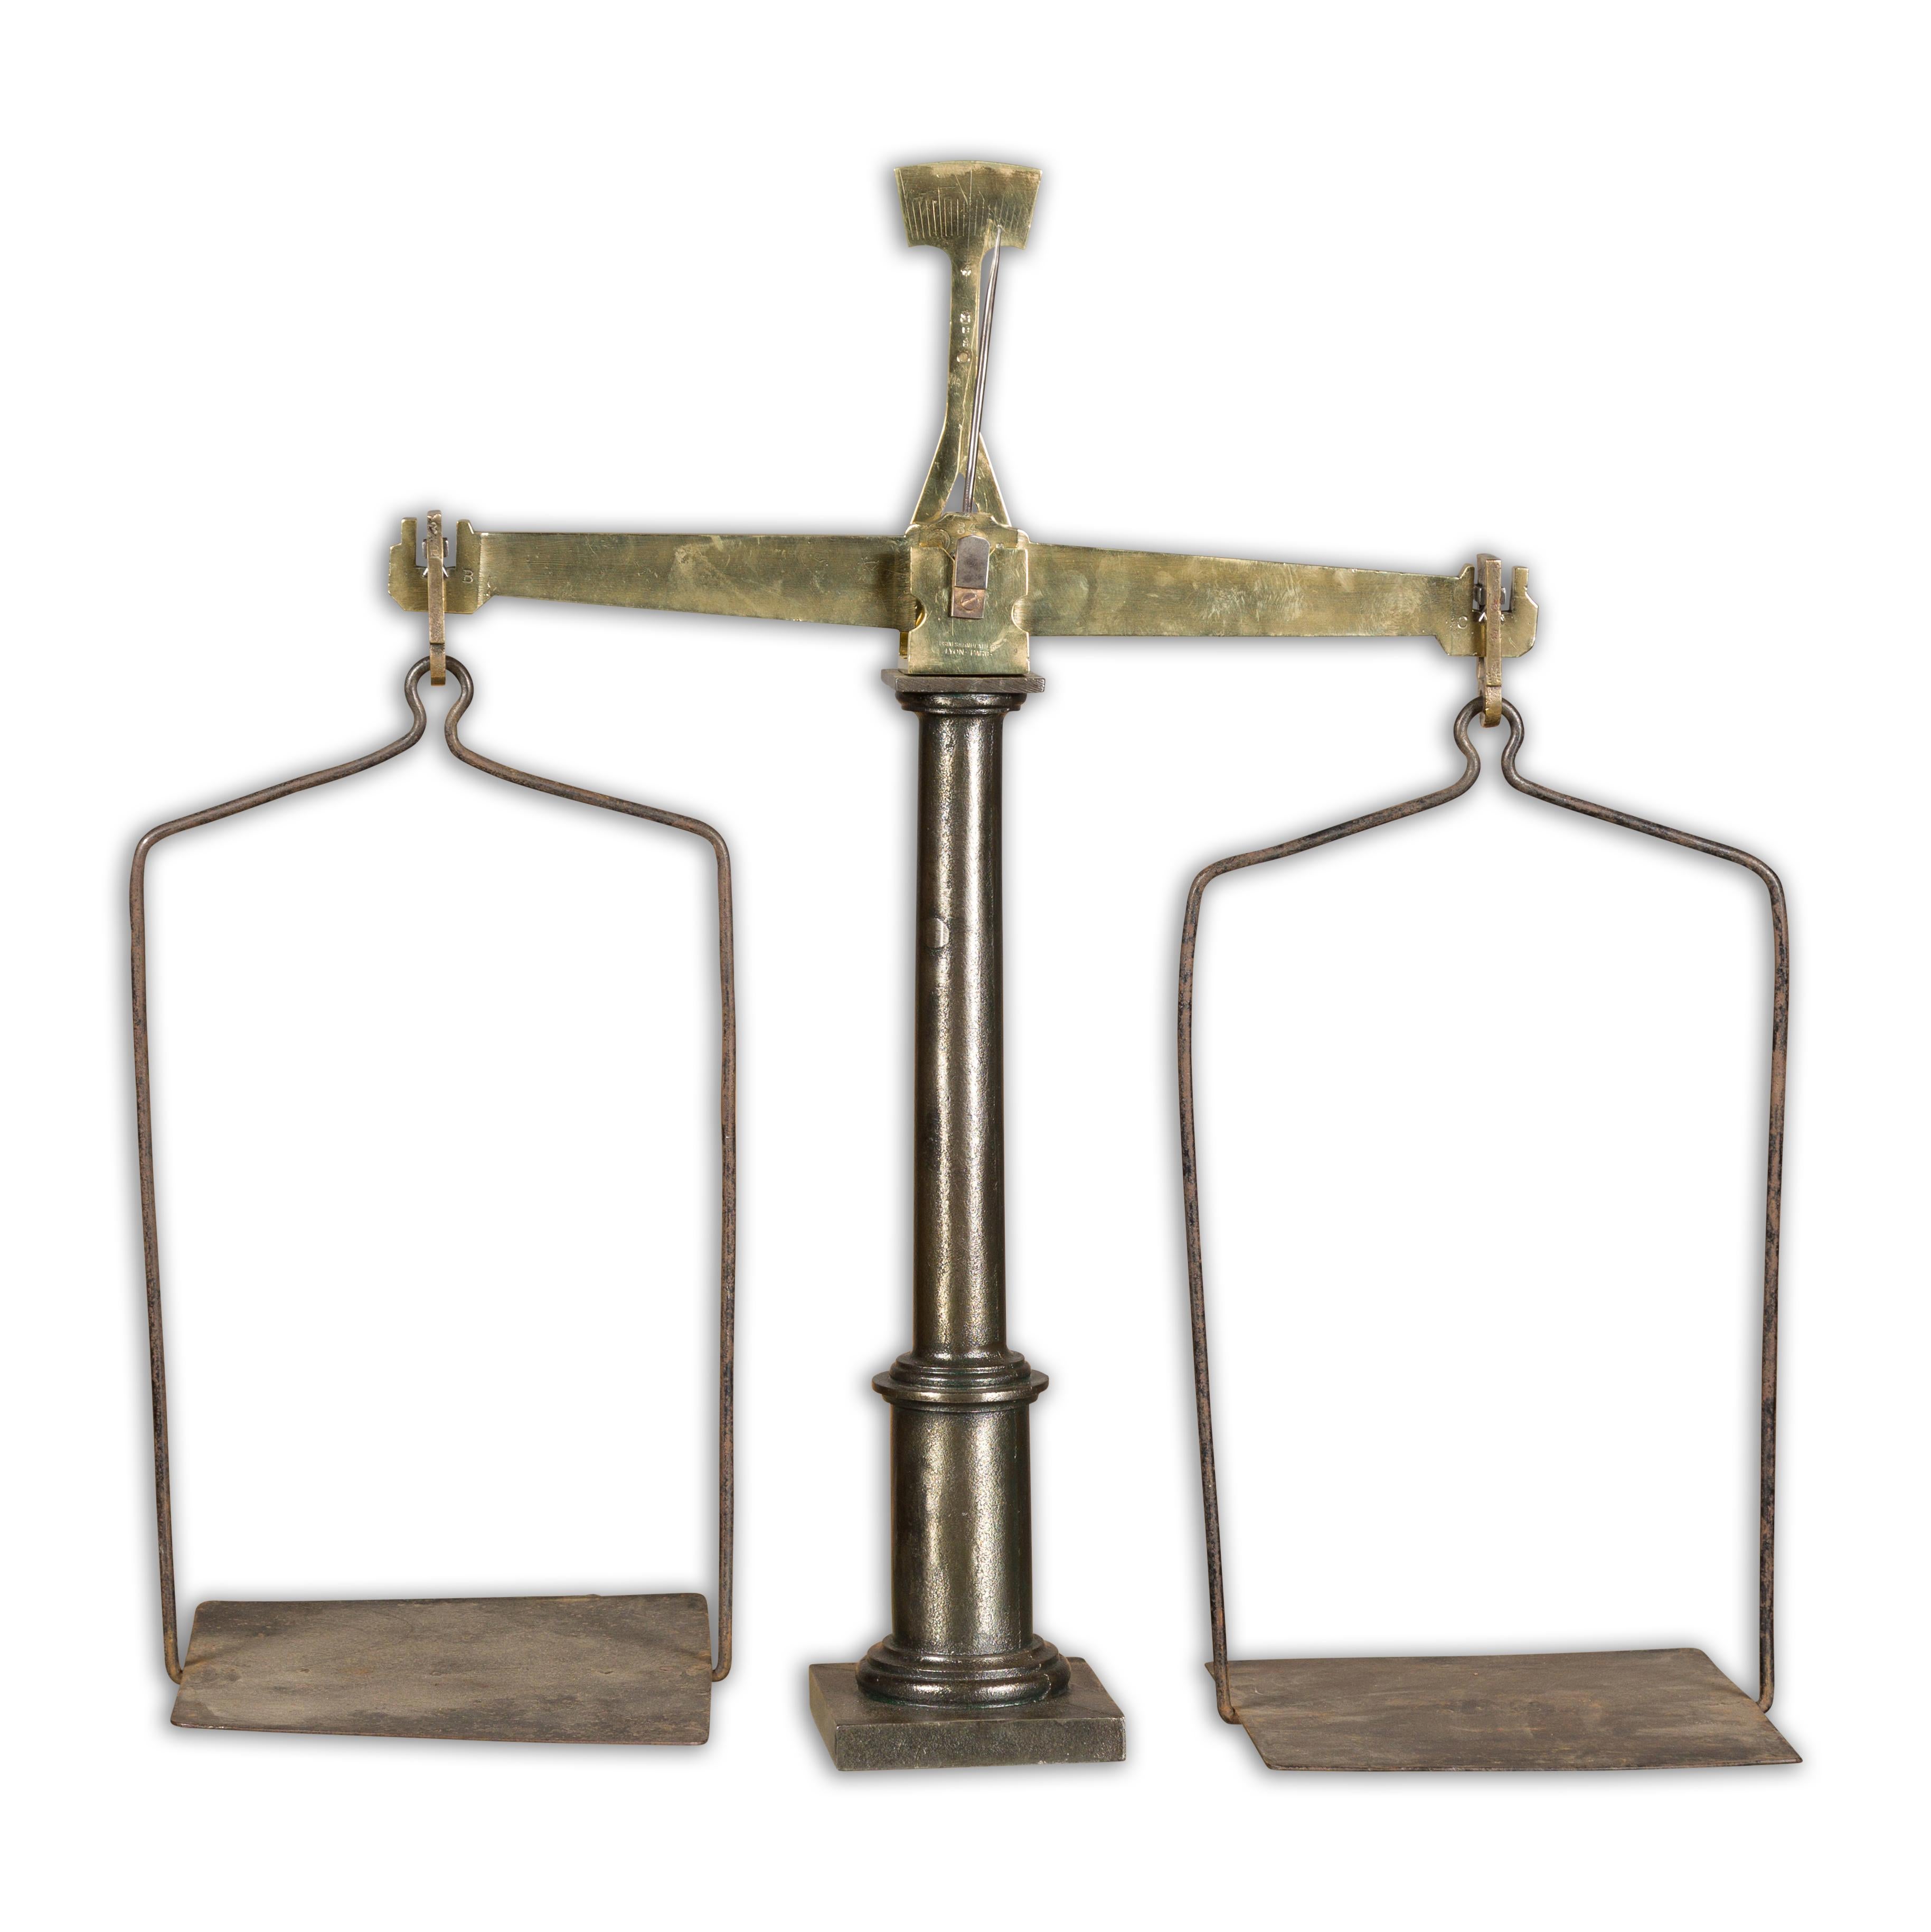 A French brass and steel scale from the 19th century with central column and two weighing pans. Embrace the charm and sophistication of the 19th century with this exquisite French brass and steel scale, a testament to the craftsmanship and design